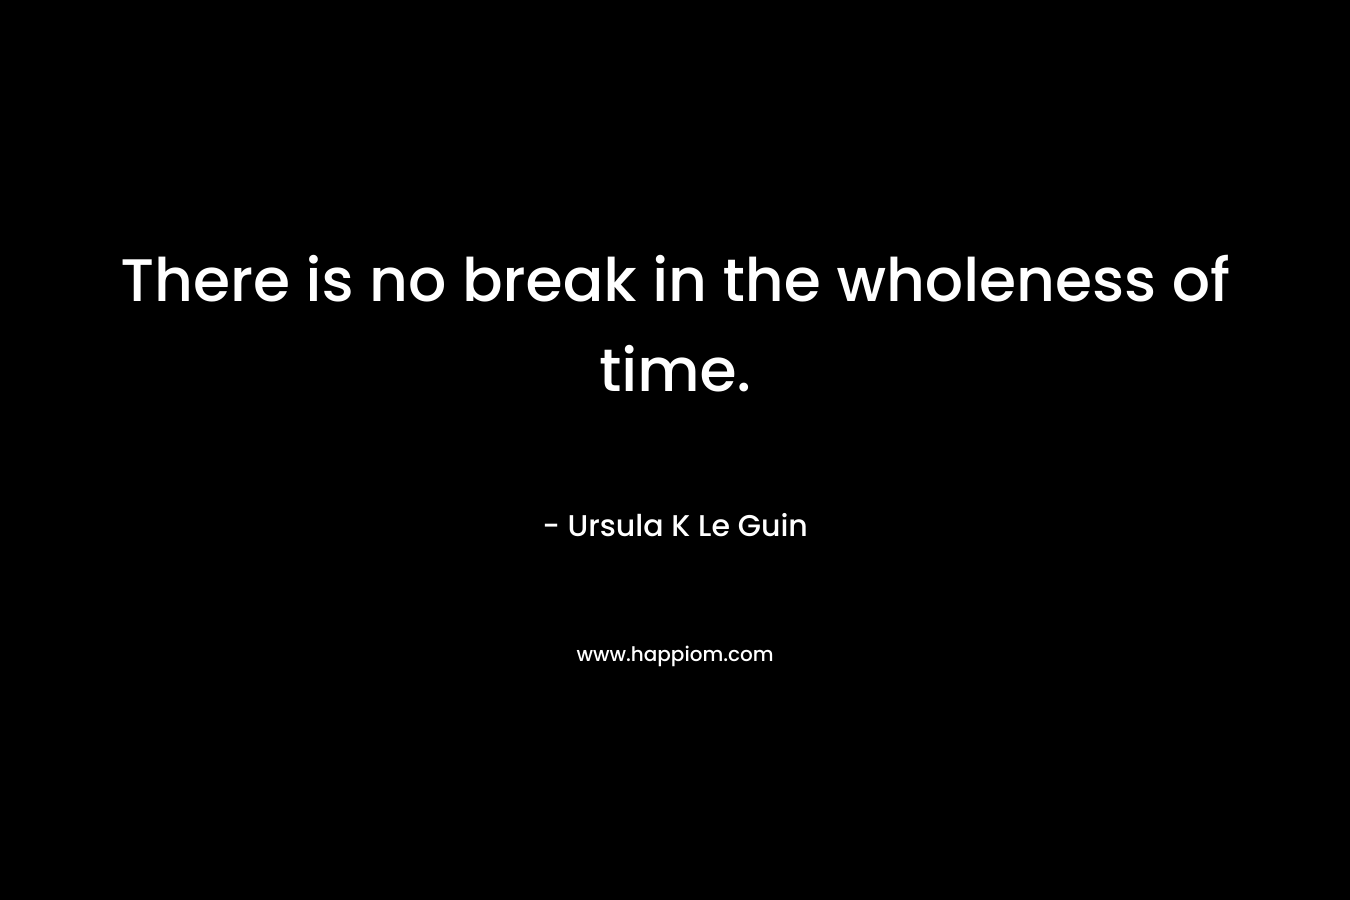 There is no break in the wholeness of time.